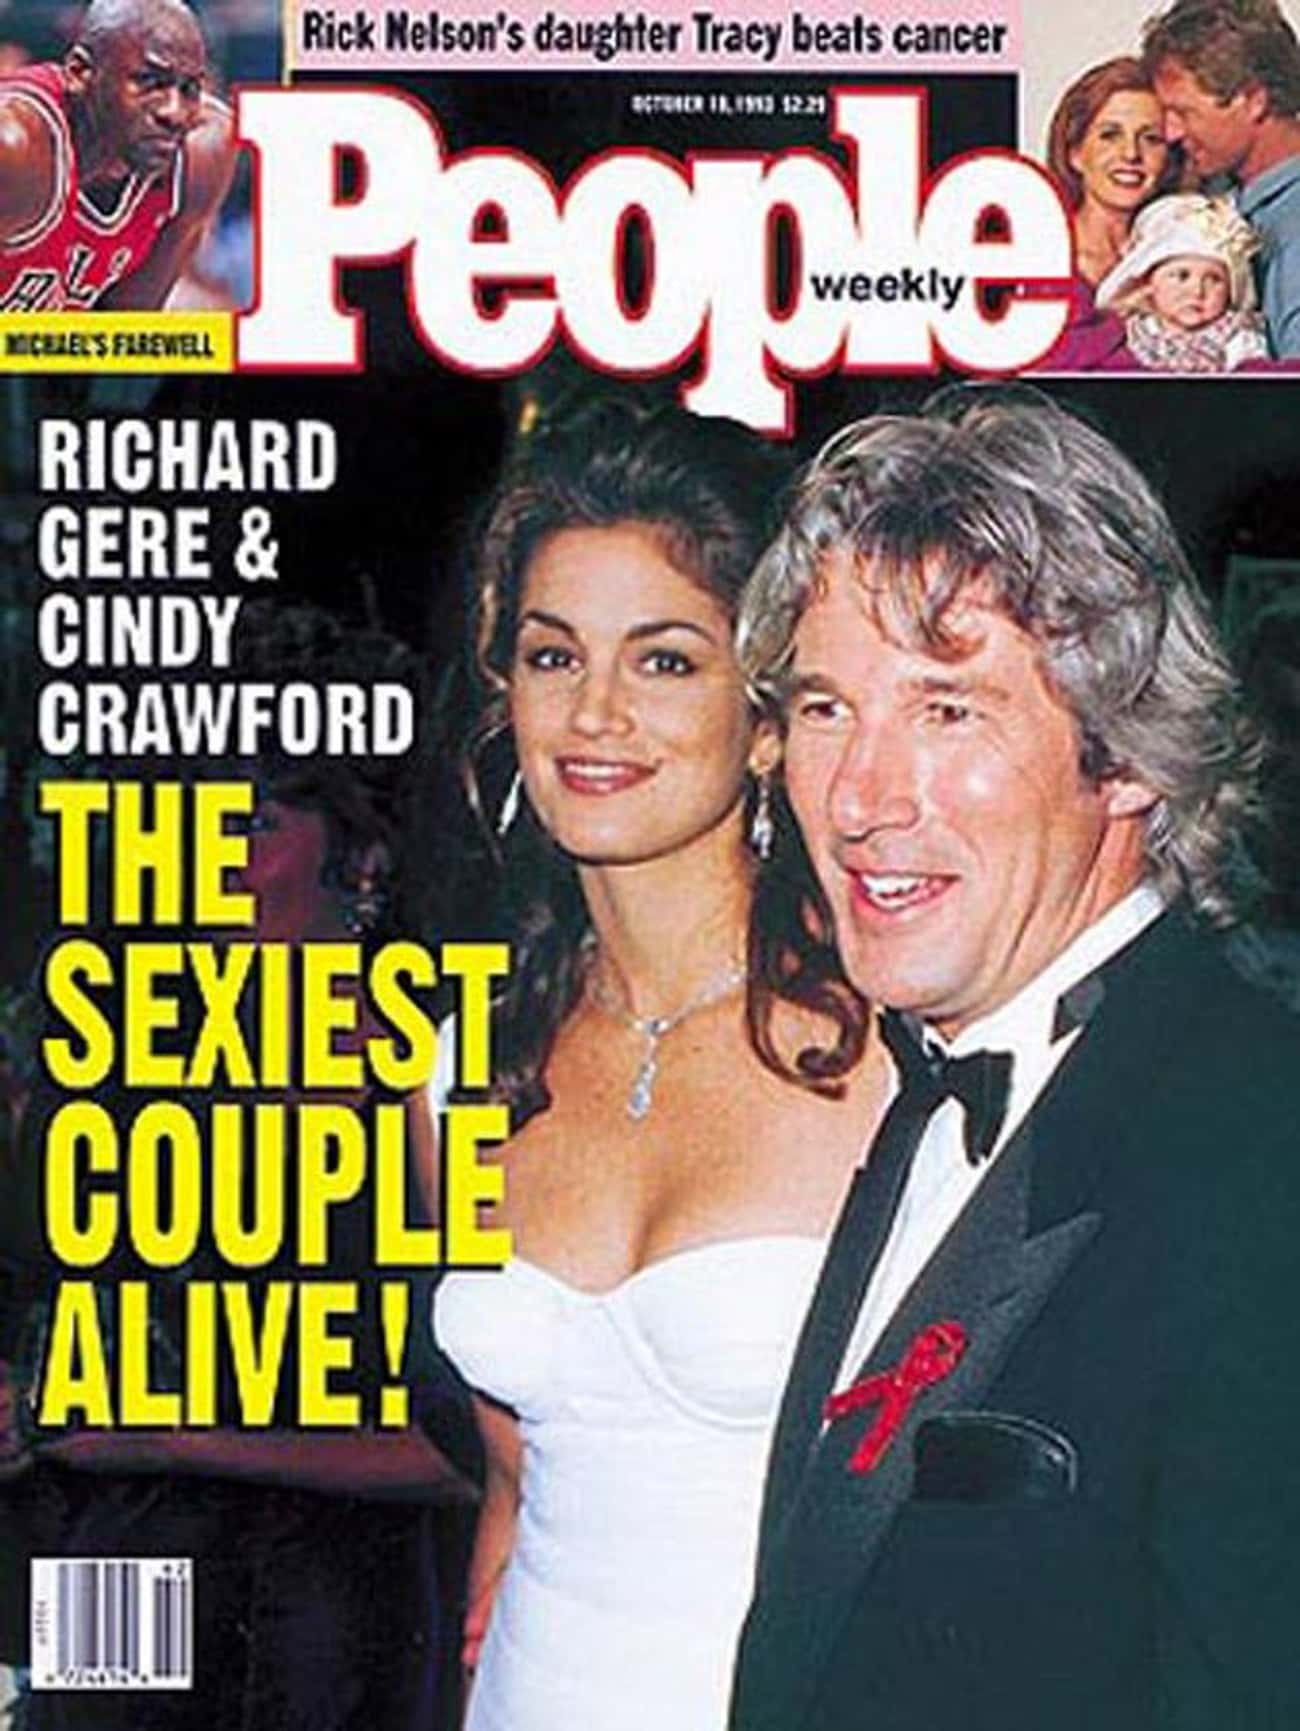 1993 - Cindy Crawford and Richard Gere (Sexiest Couple Alive)